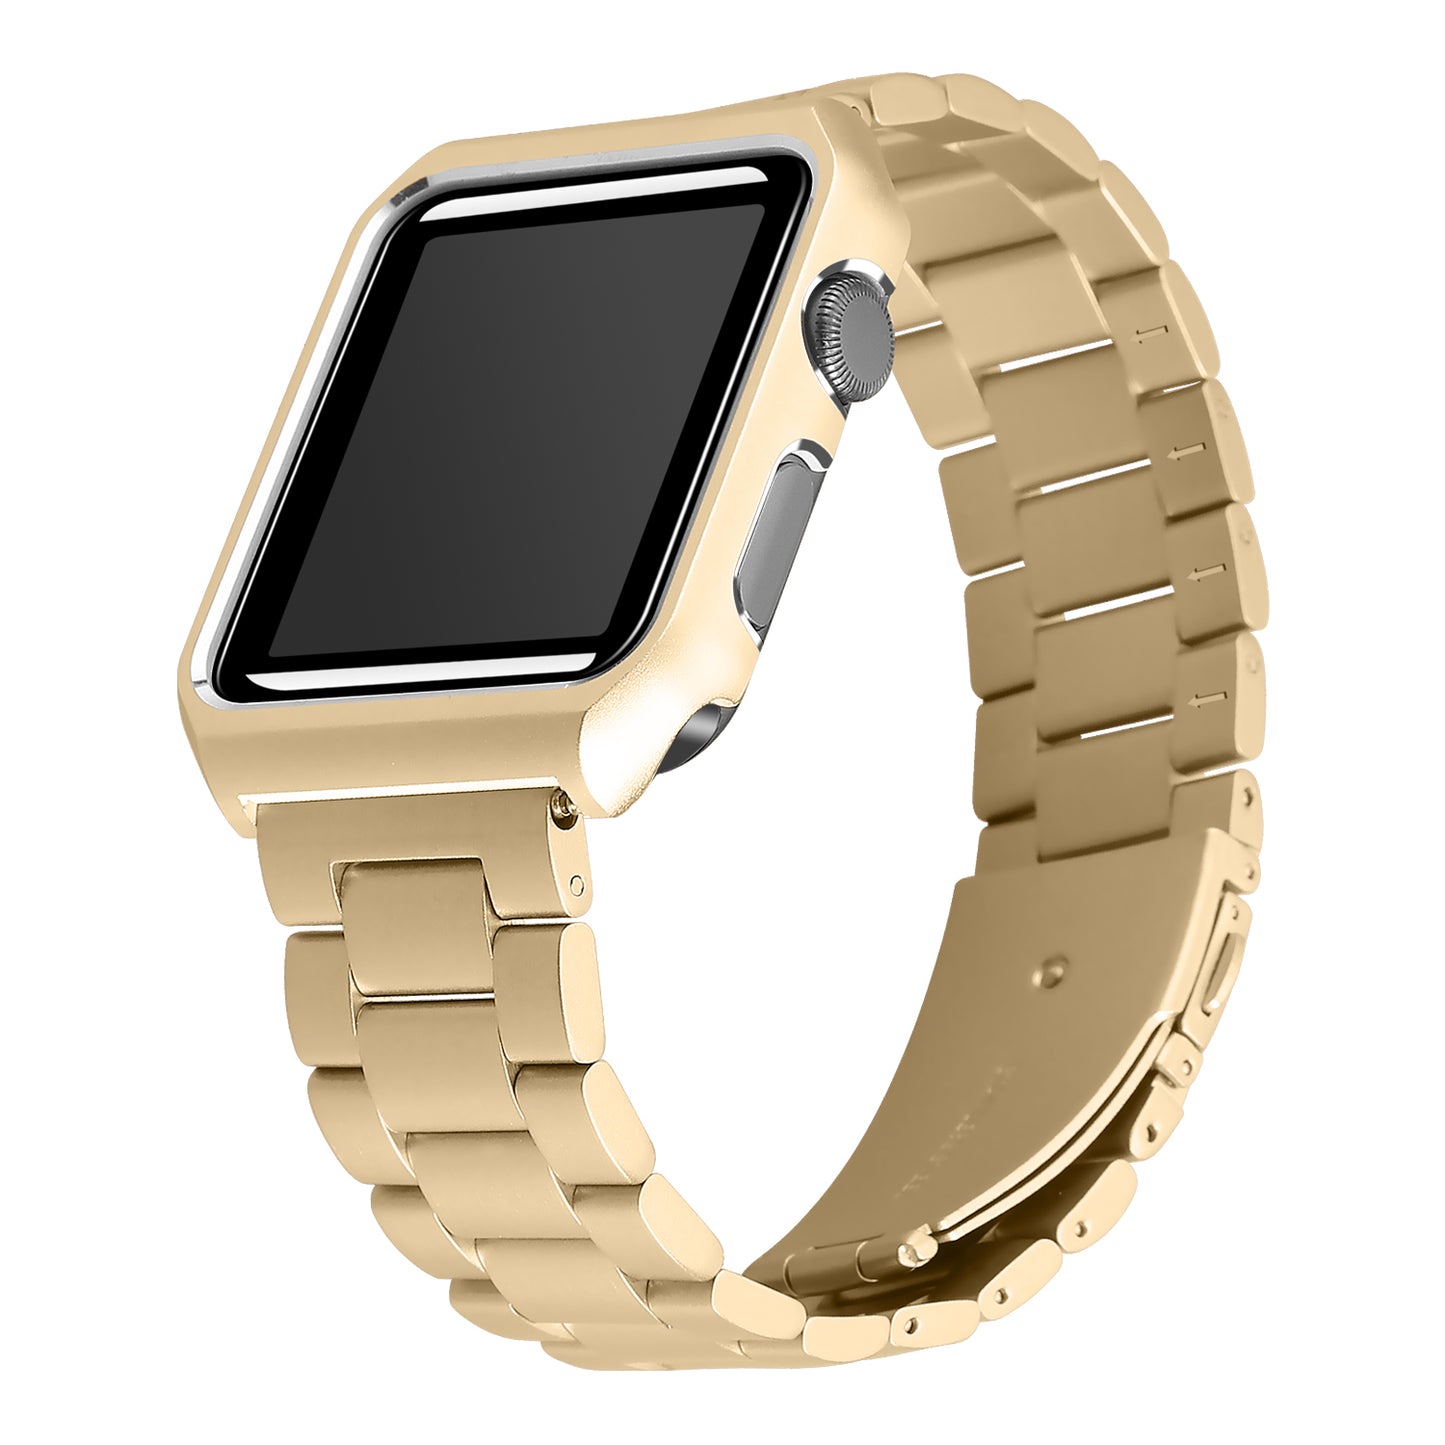 Stainless Steel Band w/ Frame for Apple Watch